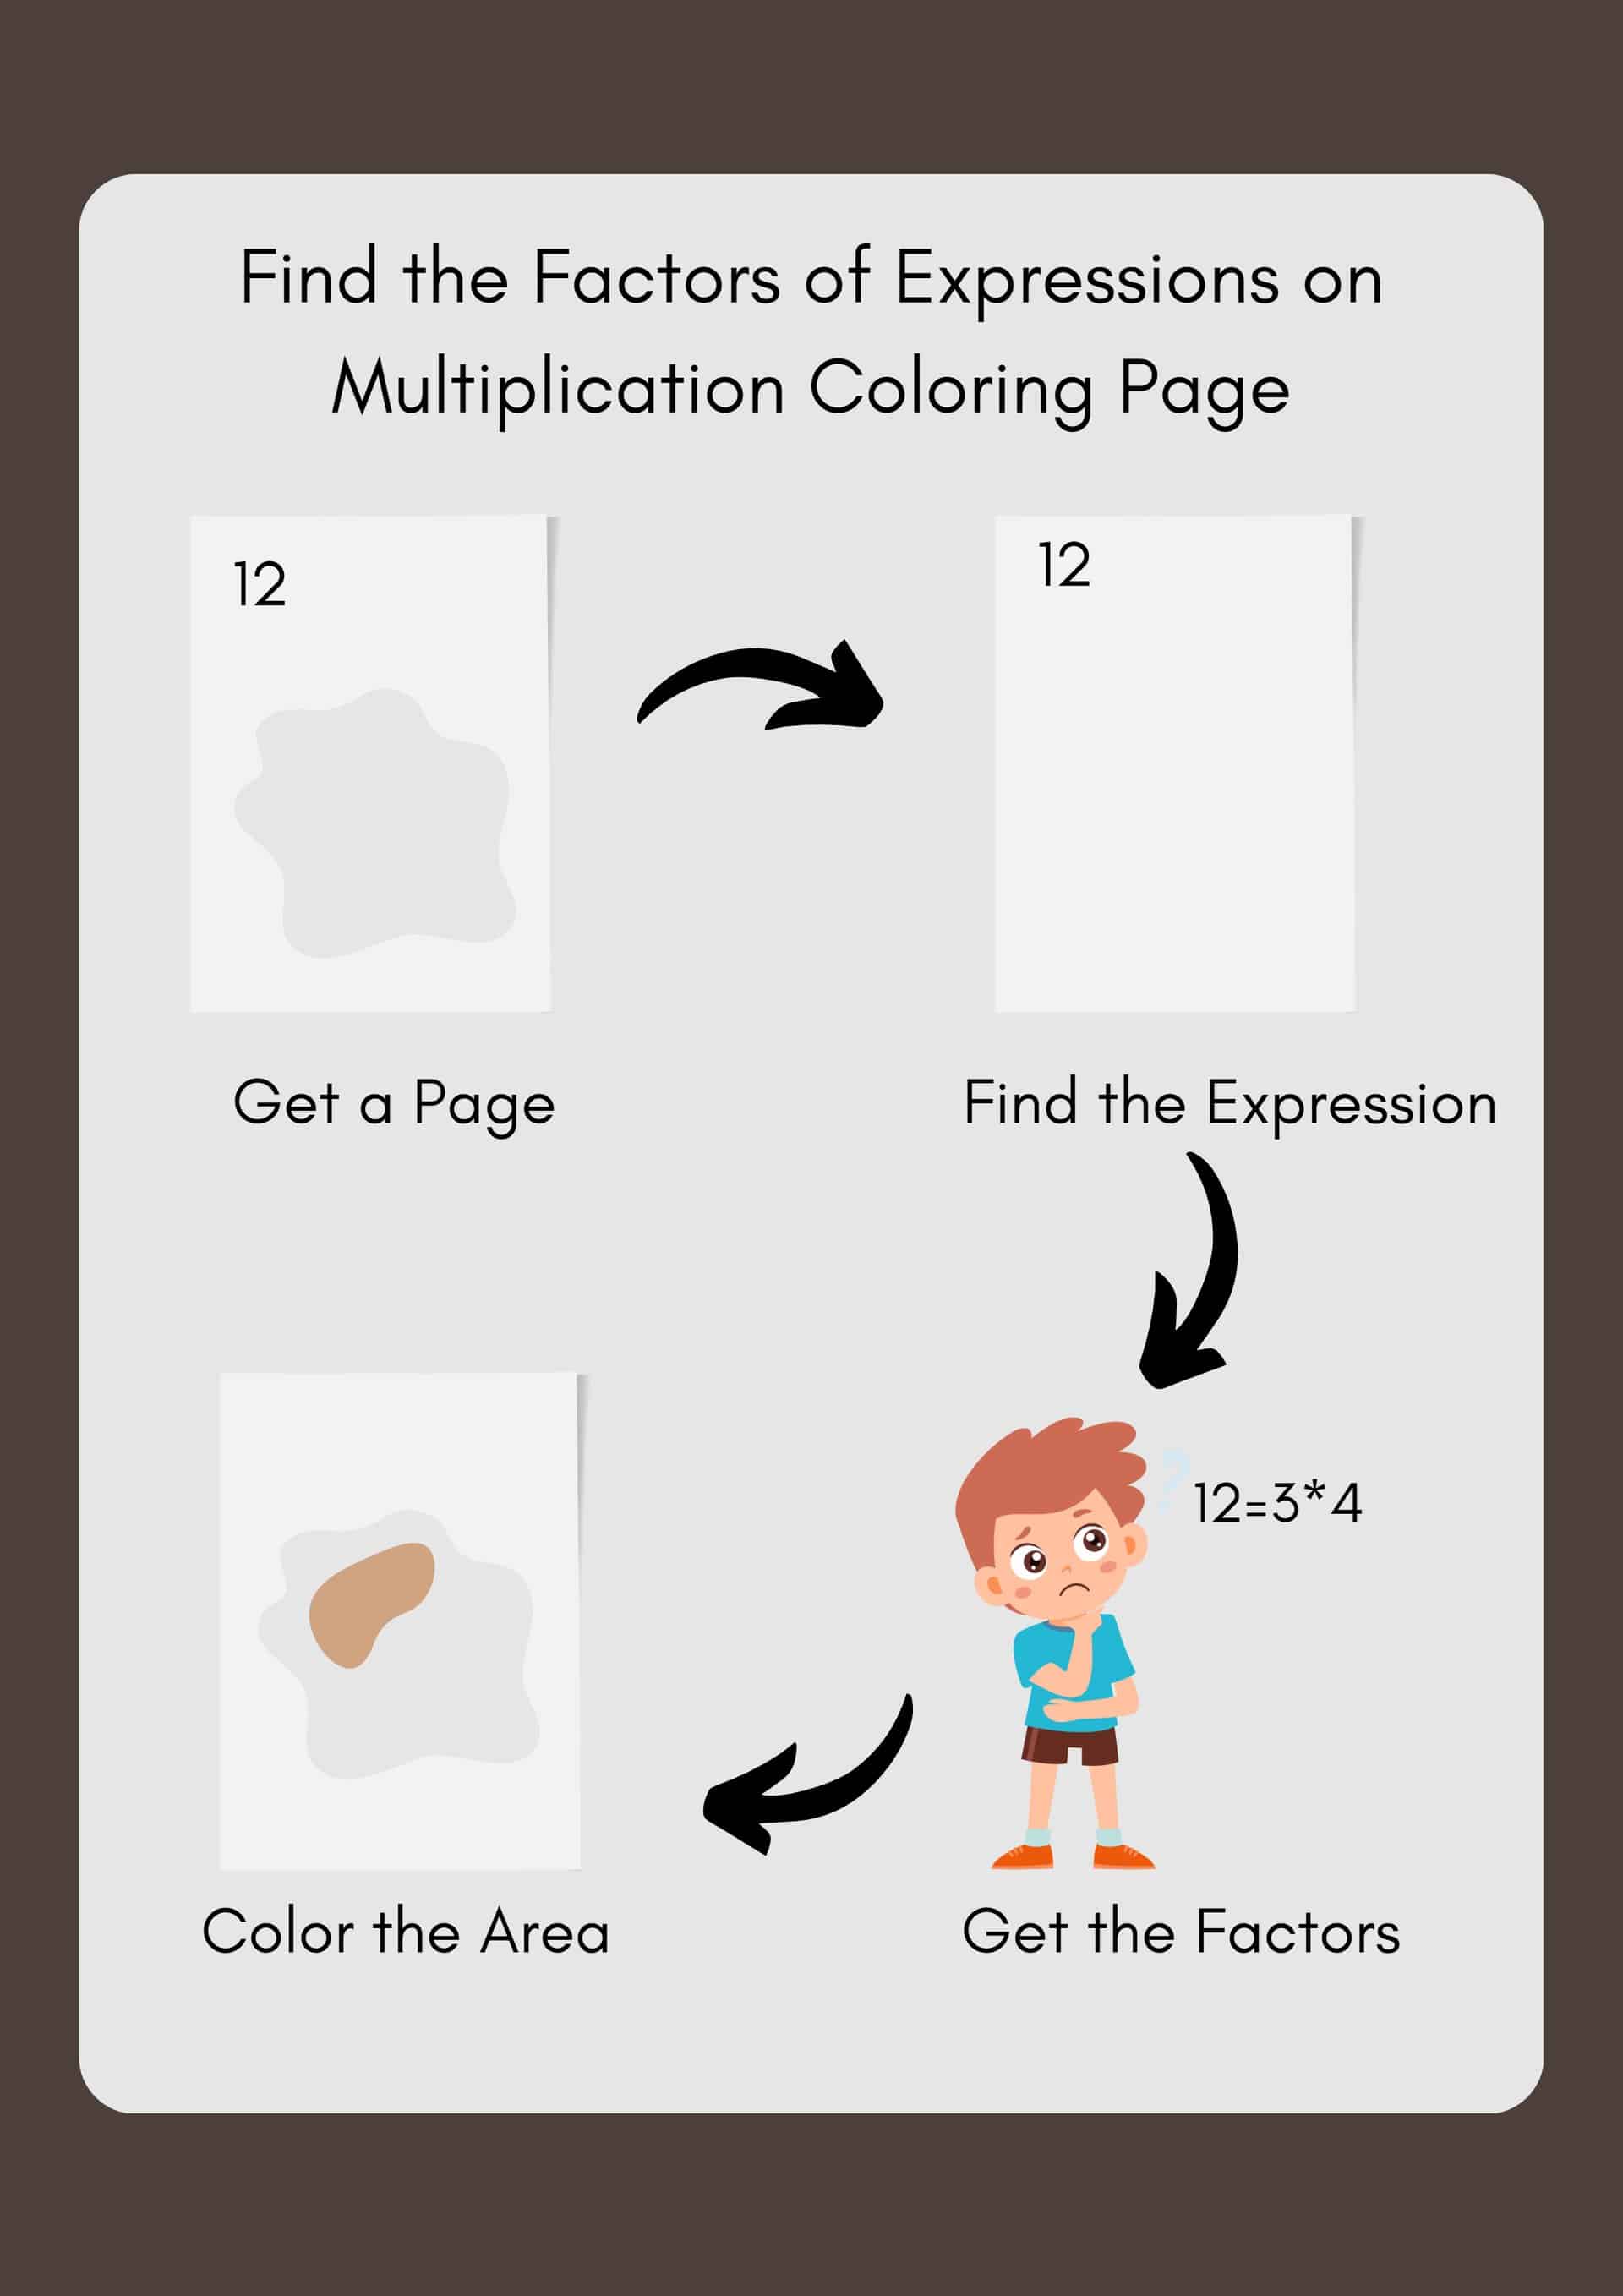 Steps of Finding the Factors of Expressions on Multiplication Coloring Page